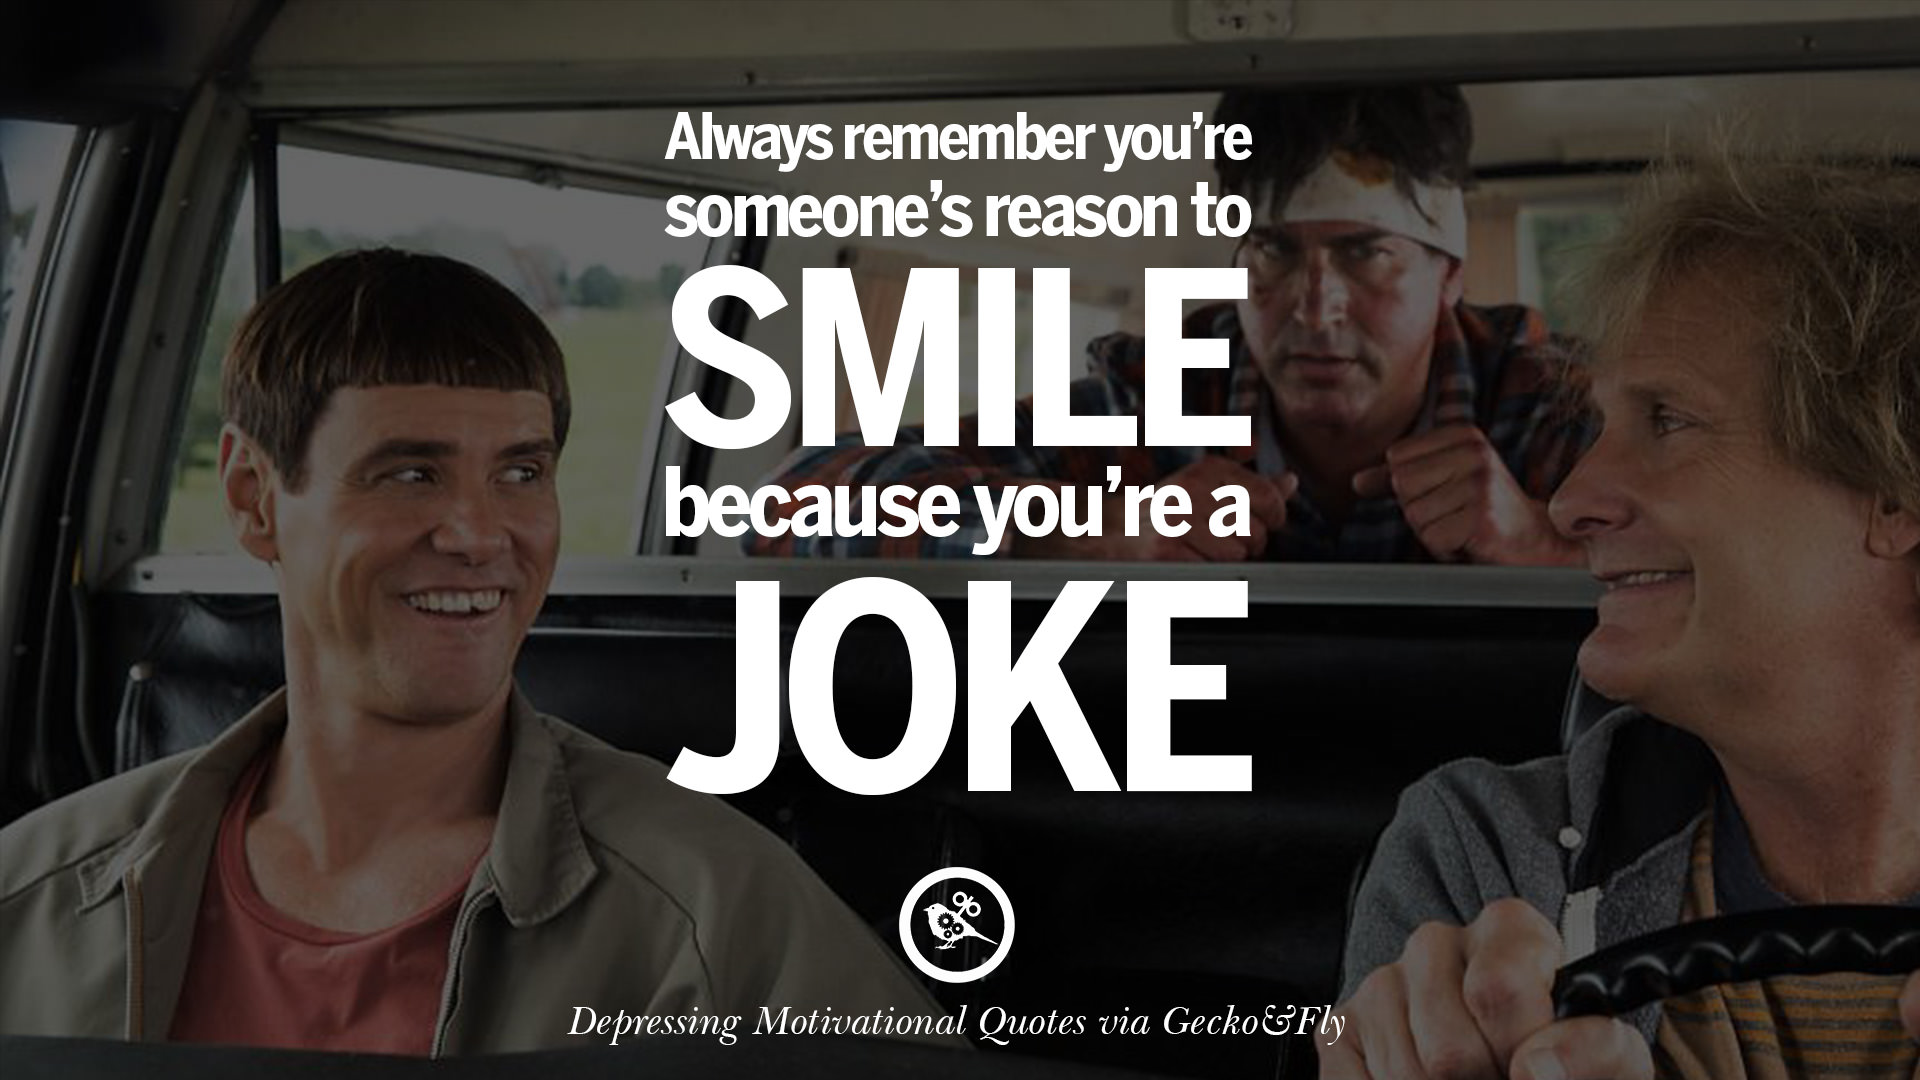 Always remember you're someone's reason to smile because you're a joke. Remember youre someones reasons to smile because youre a joke. You're someone's reason to Masturbate обои. Always remember you're someone's reason to smile перевод на русский. You re joking